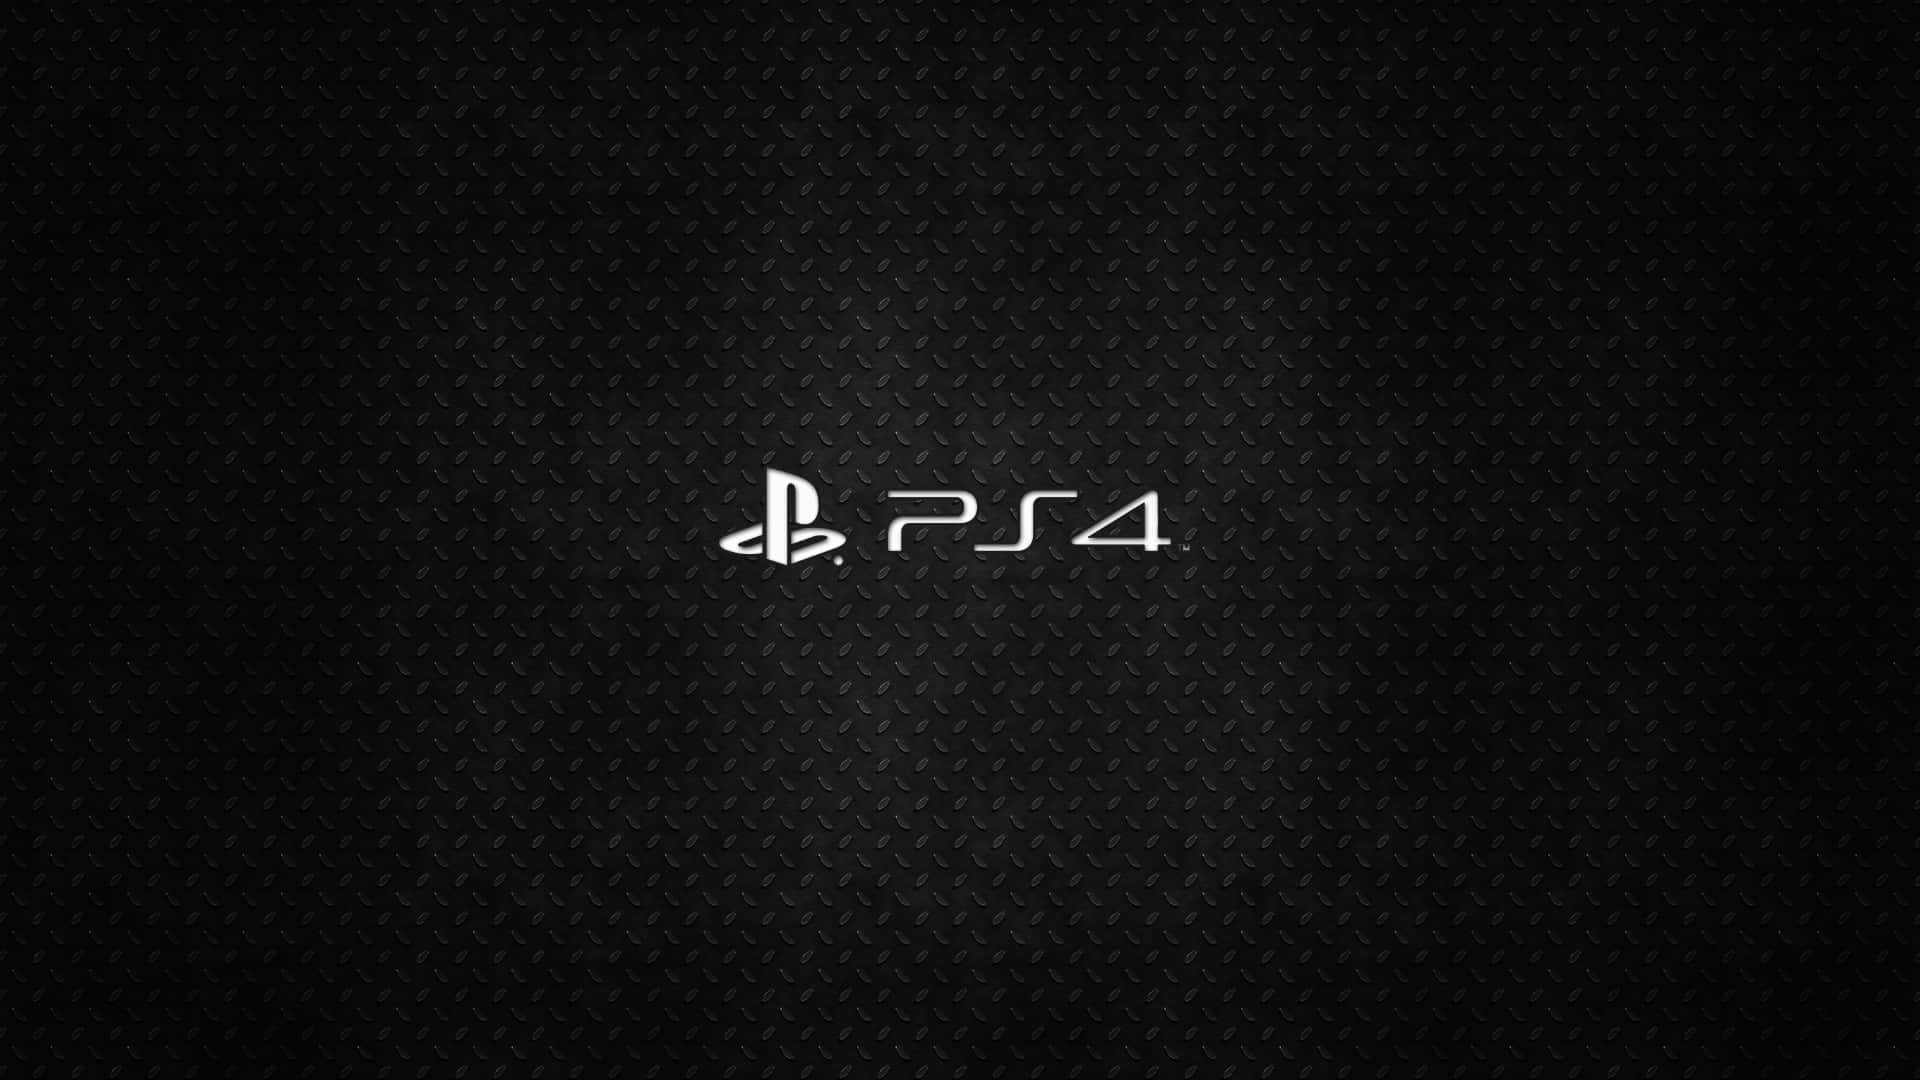 Simple Cool Ps4 With Large Logo In White In The Middle